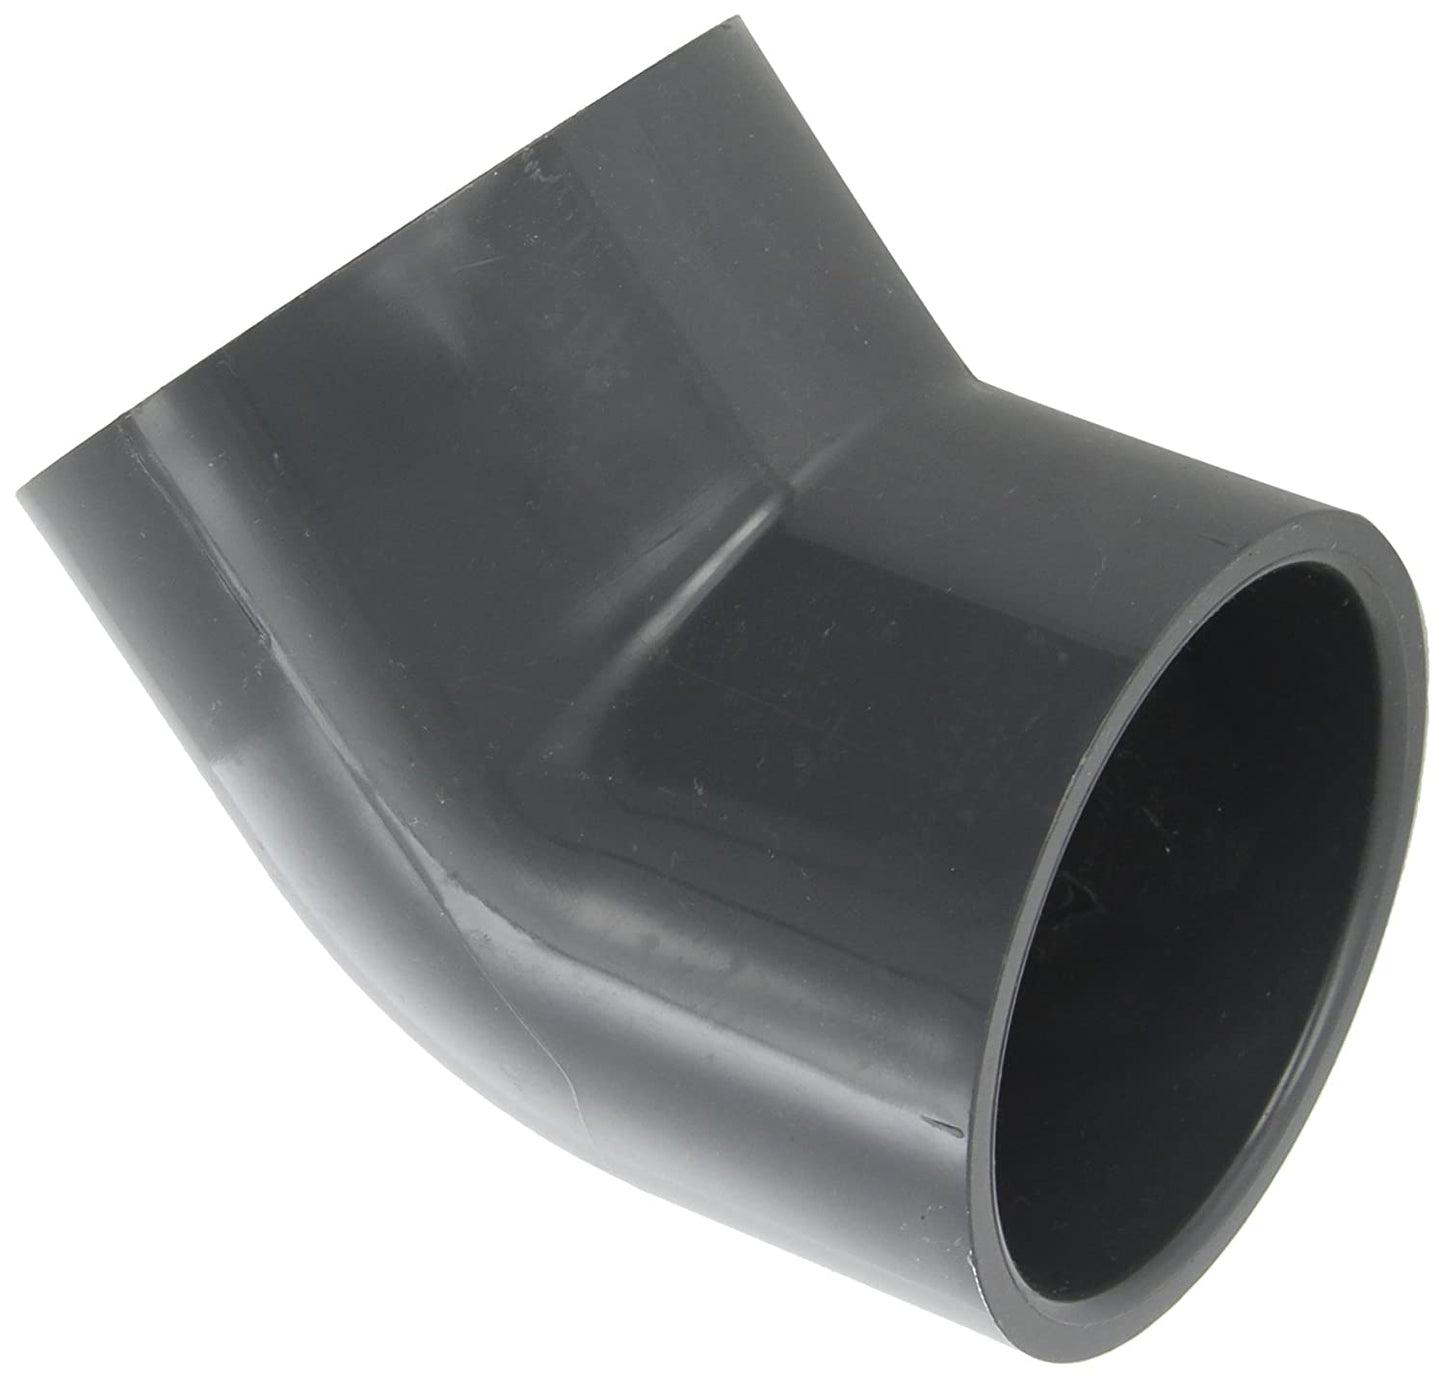 817-030 - PVC Pipe Fitting, 45 Degree Elbow, Schedule 80, 3" Socket